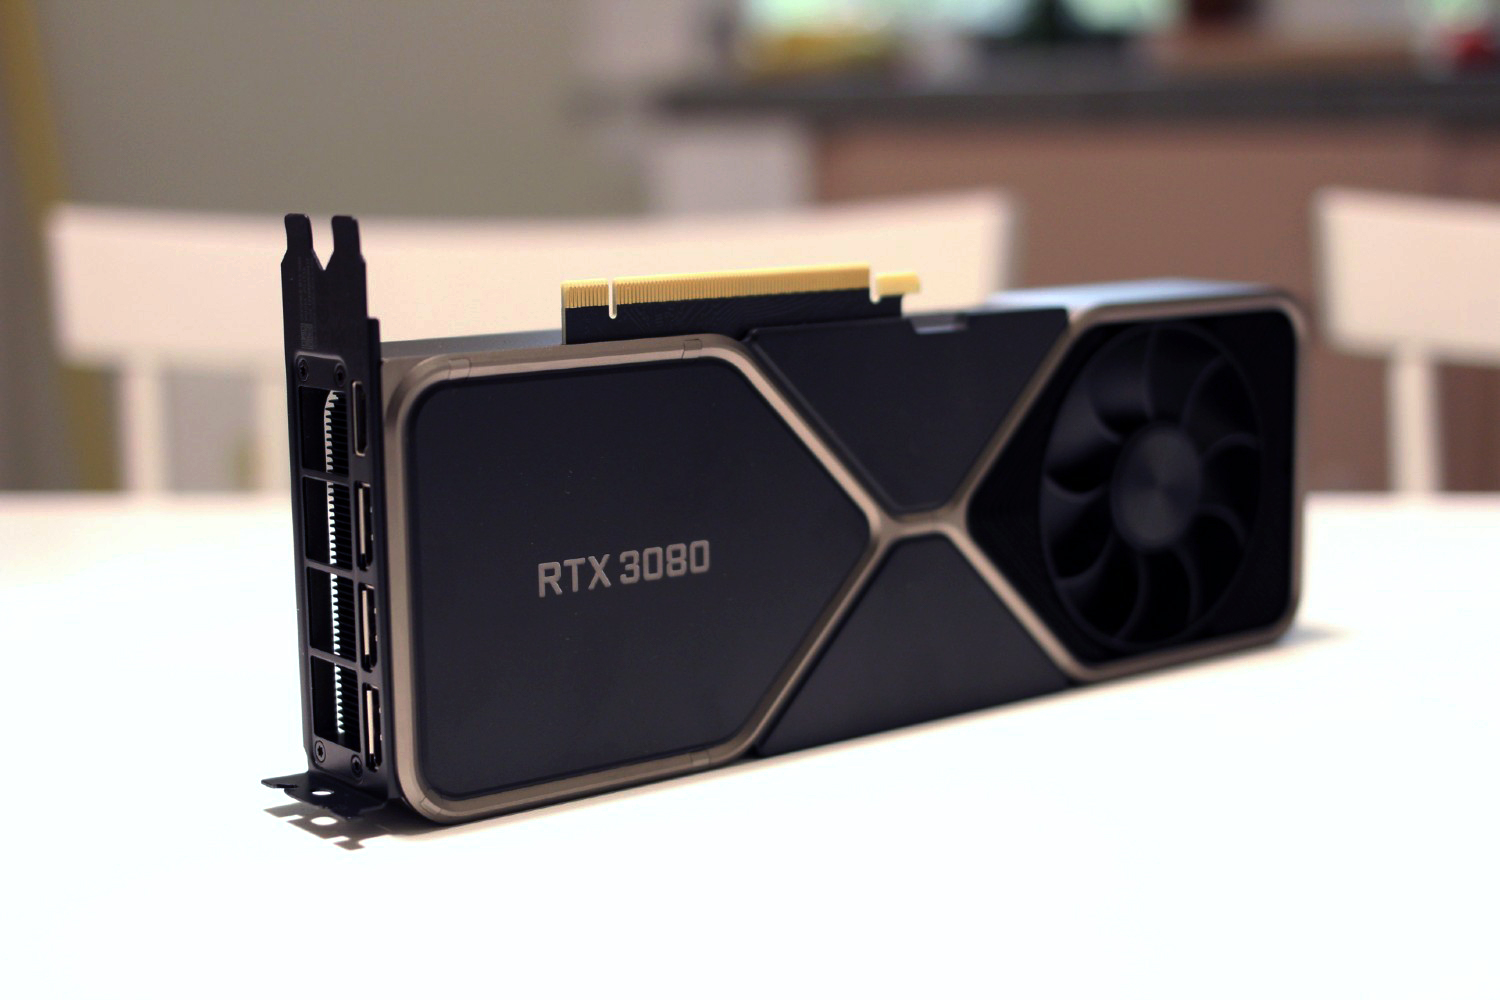 RTX 3080 graphics card on a table.